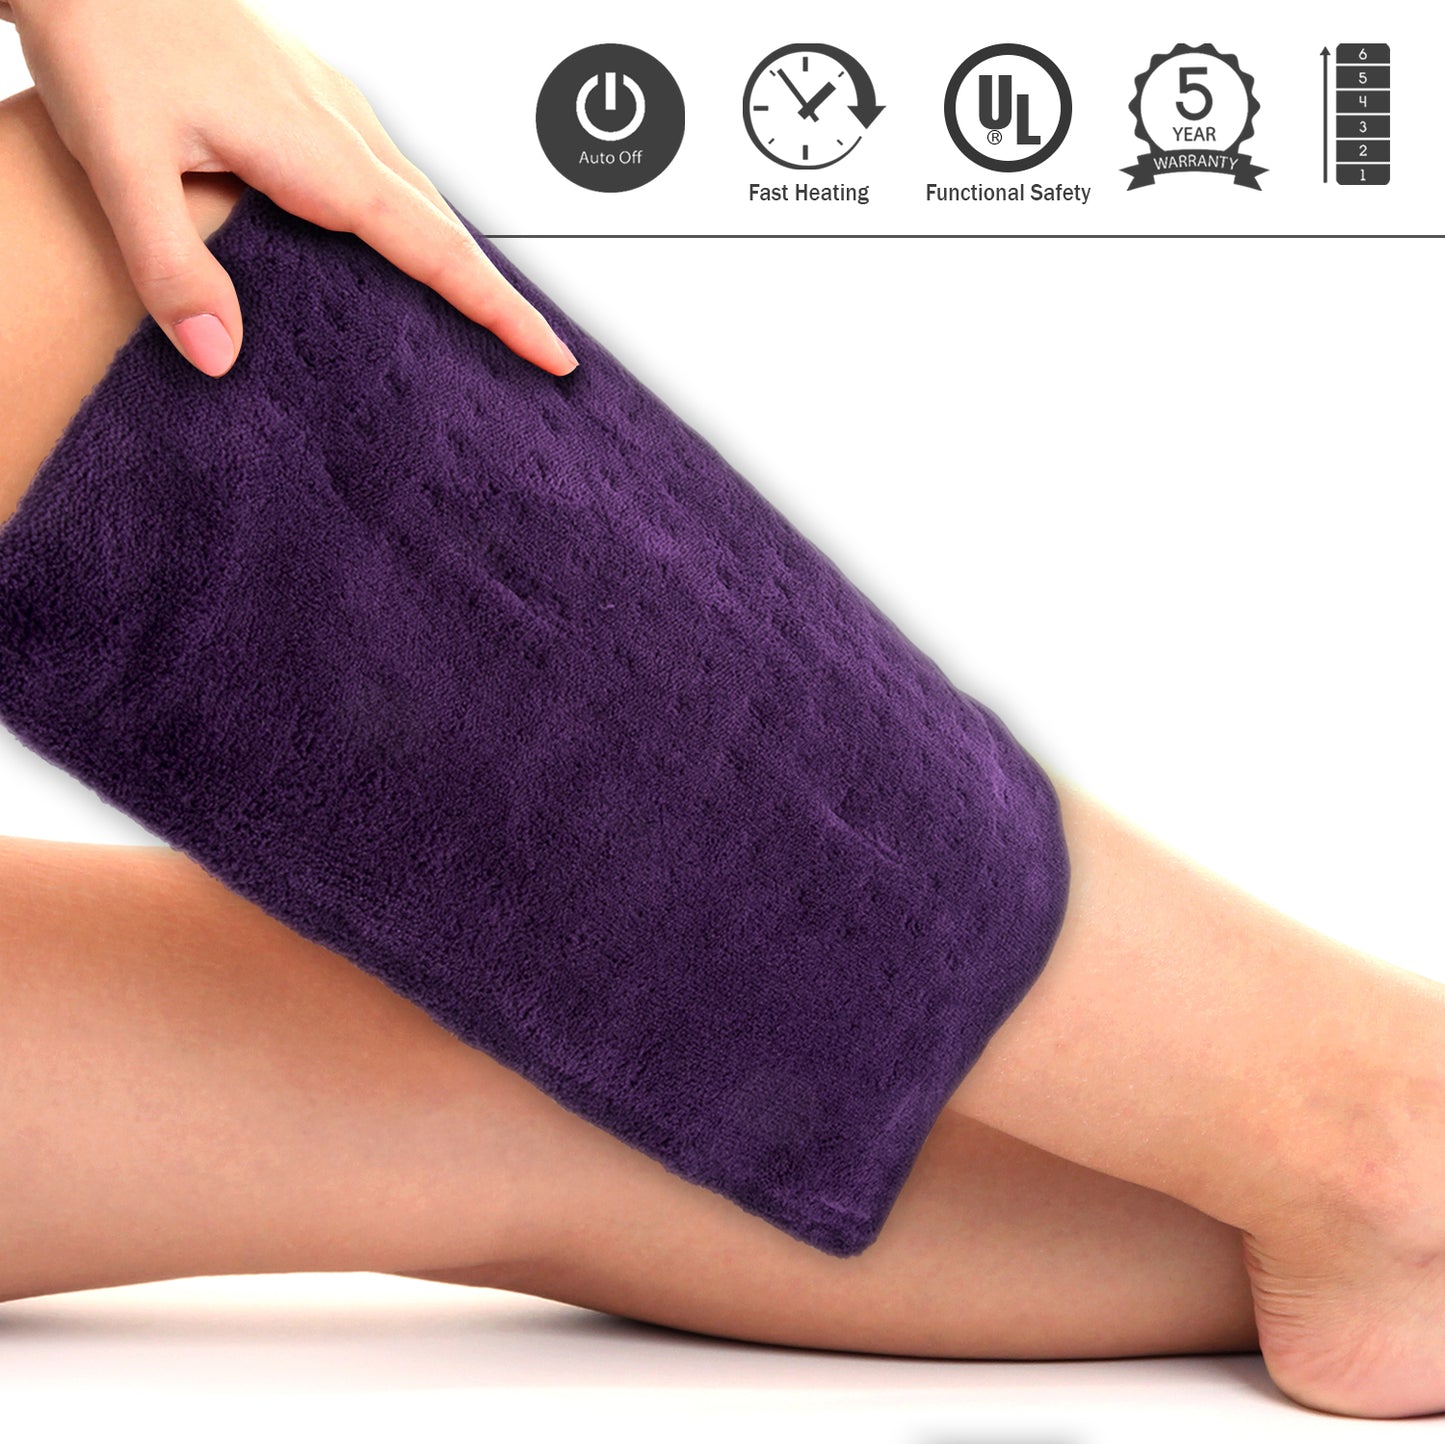 Electric Heating Pad For Muscle Cramp Back Pain Fast Relief Washable Large Size